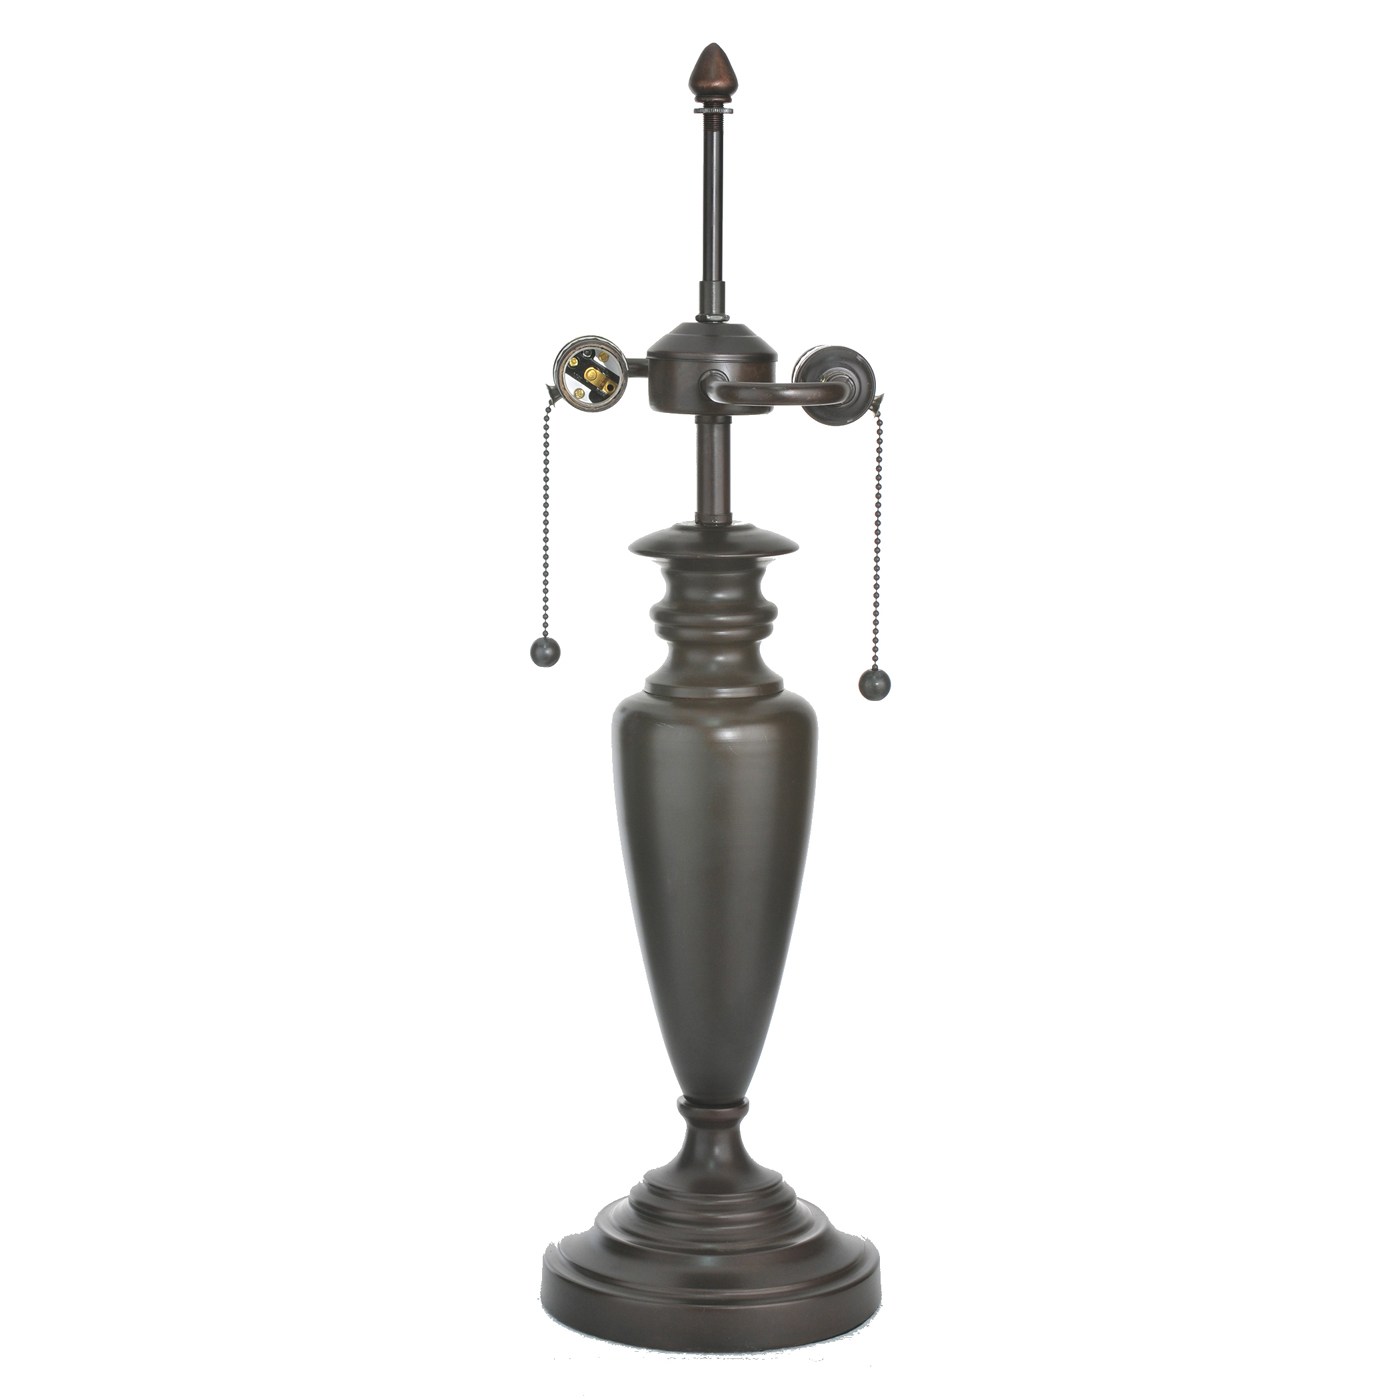 meyda tiffany desk lamp lampu light base table accent lamps this uploaded ocie kassulke from public domain that can find other search engine and posted black dining room chairs